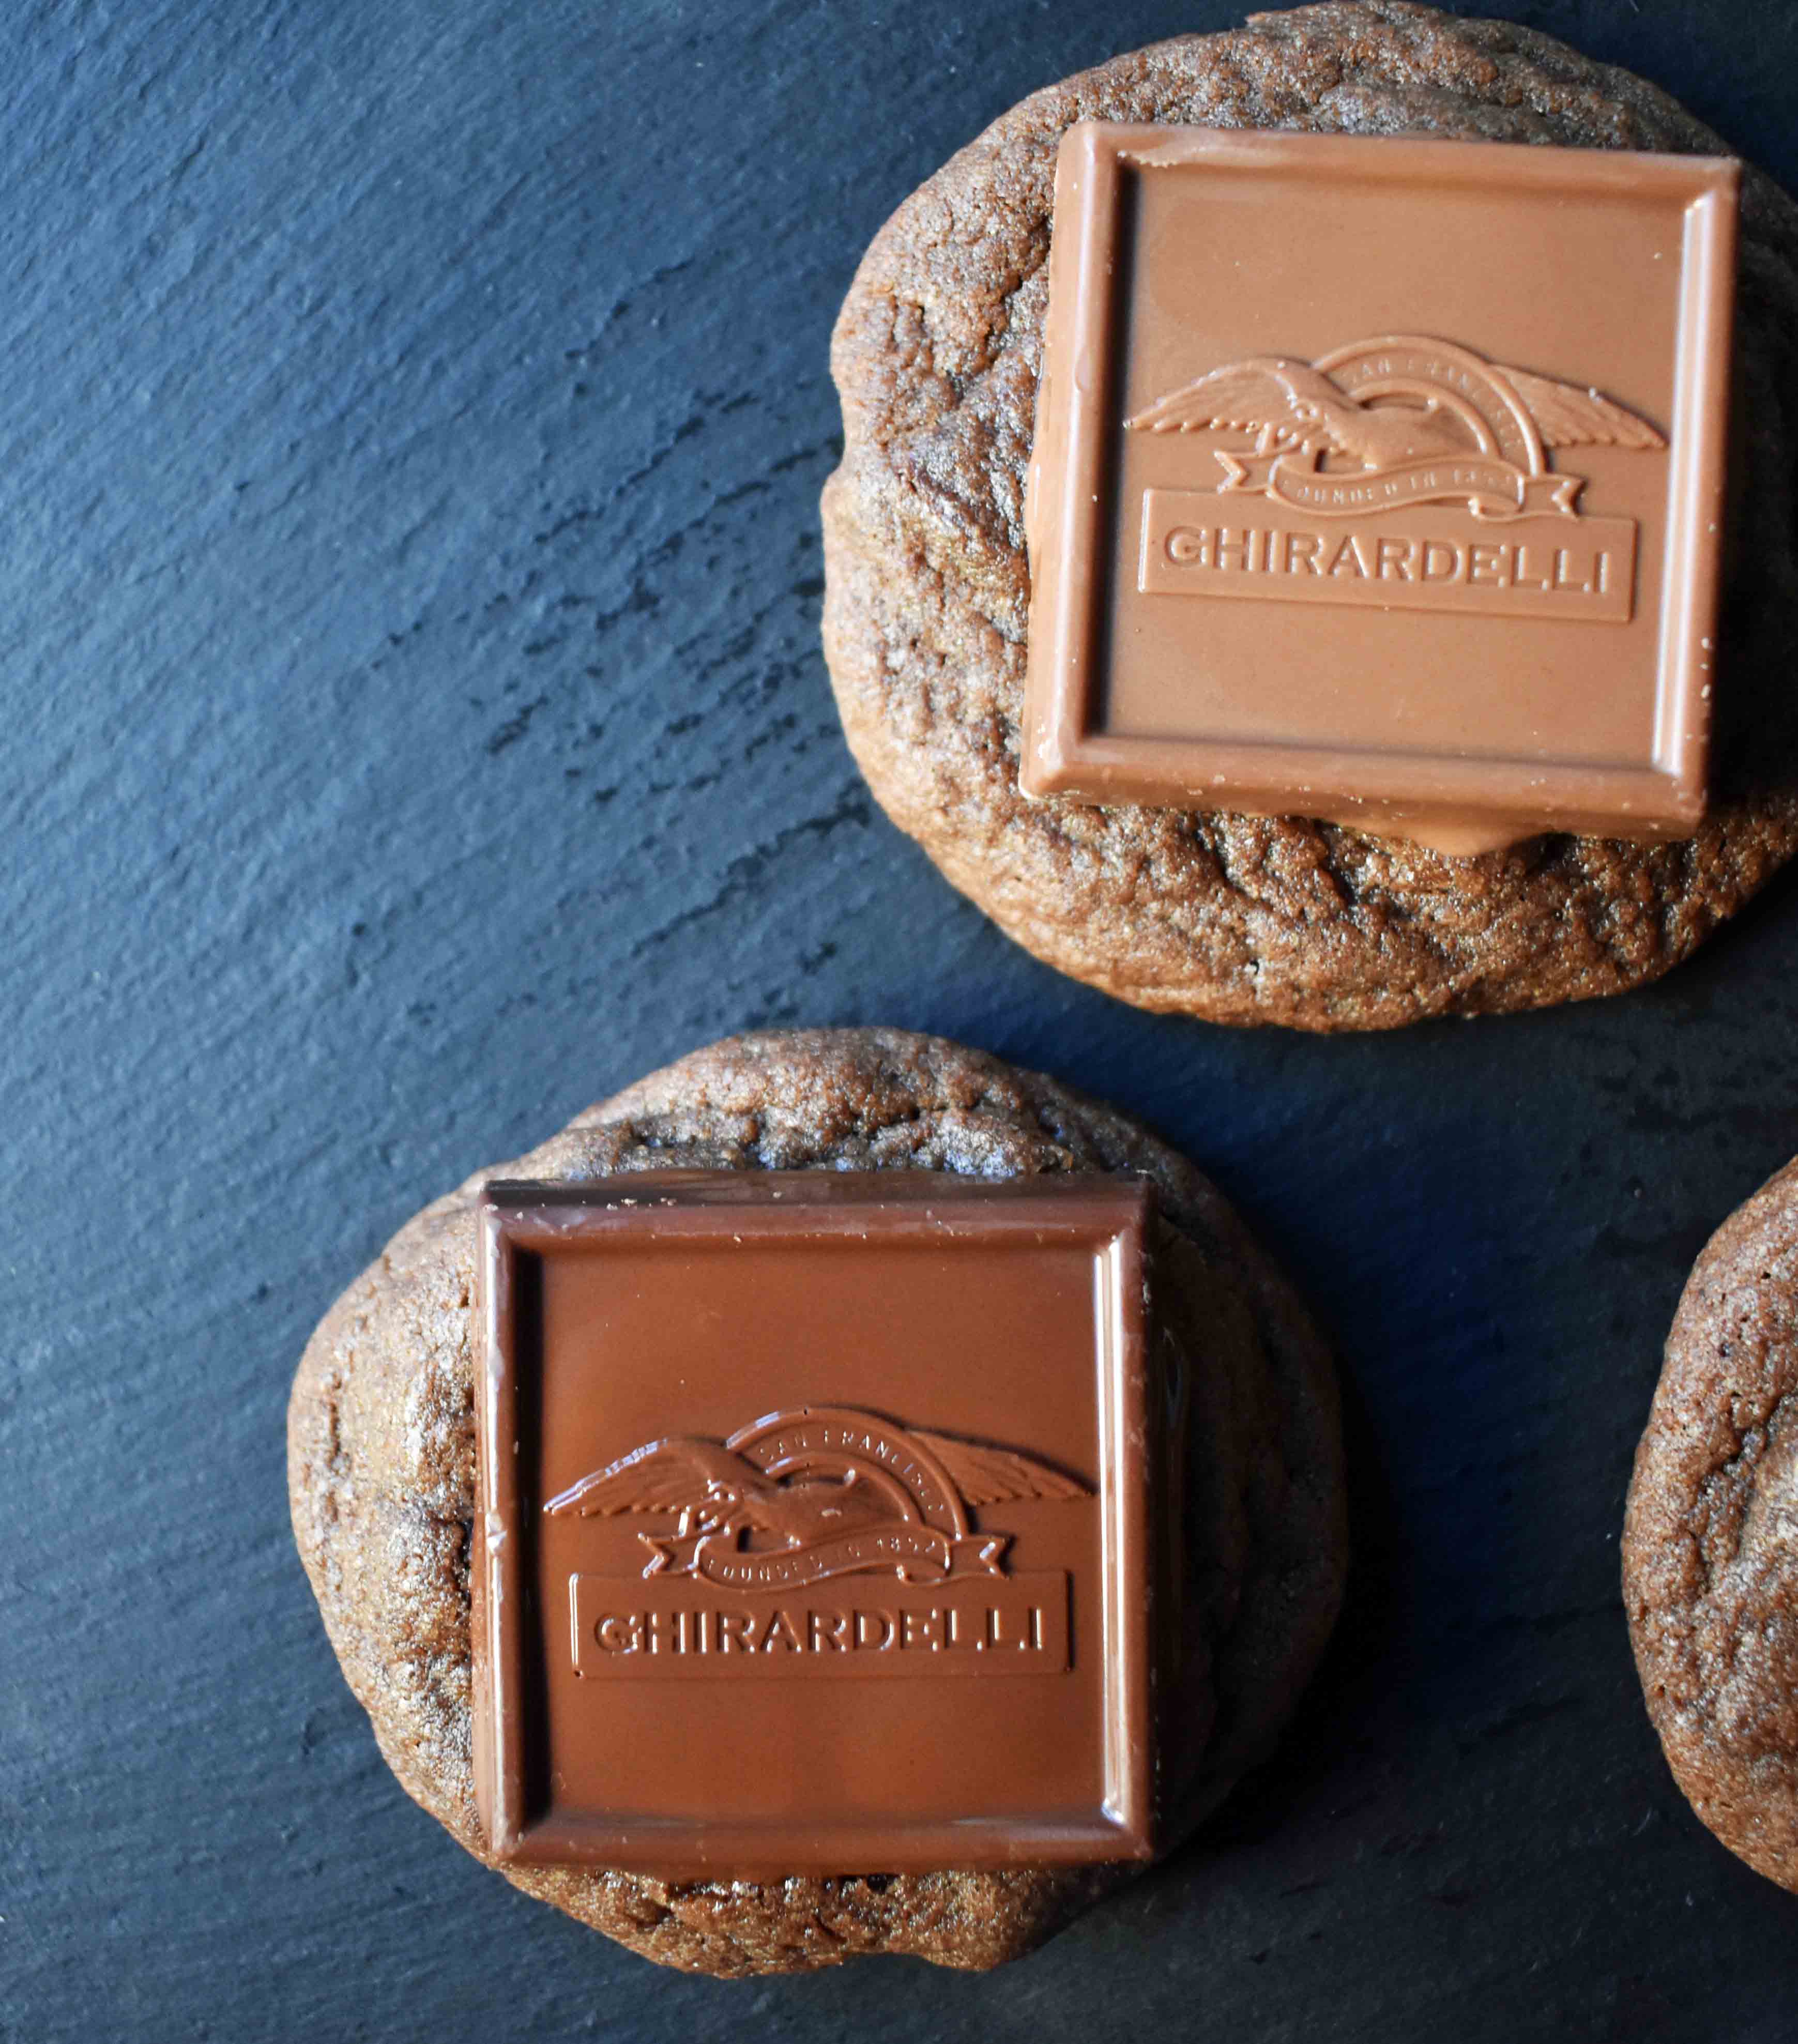 Ghirardelli Squares Chocolate Cookies. Double Chocolate Cookies topped with a creamy Ghirardelli square chocolate. Milk Chocolate Caramel, Dark Chocolate Mint,or Peppermint Bark Ghirardelli Squares are placed on top of this decadent cookie. A crowd favorite!